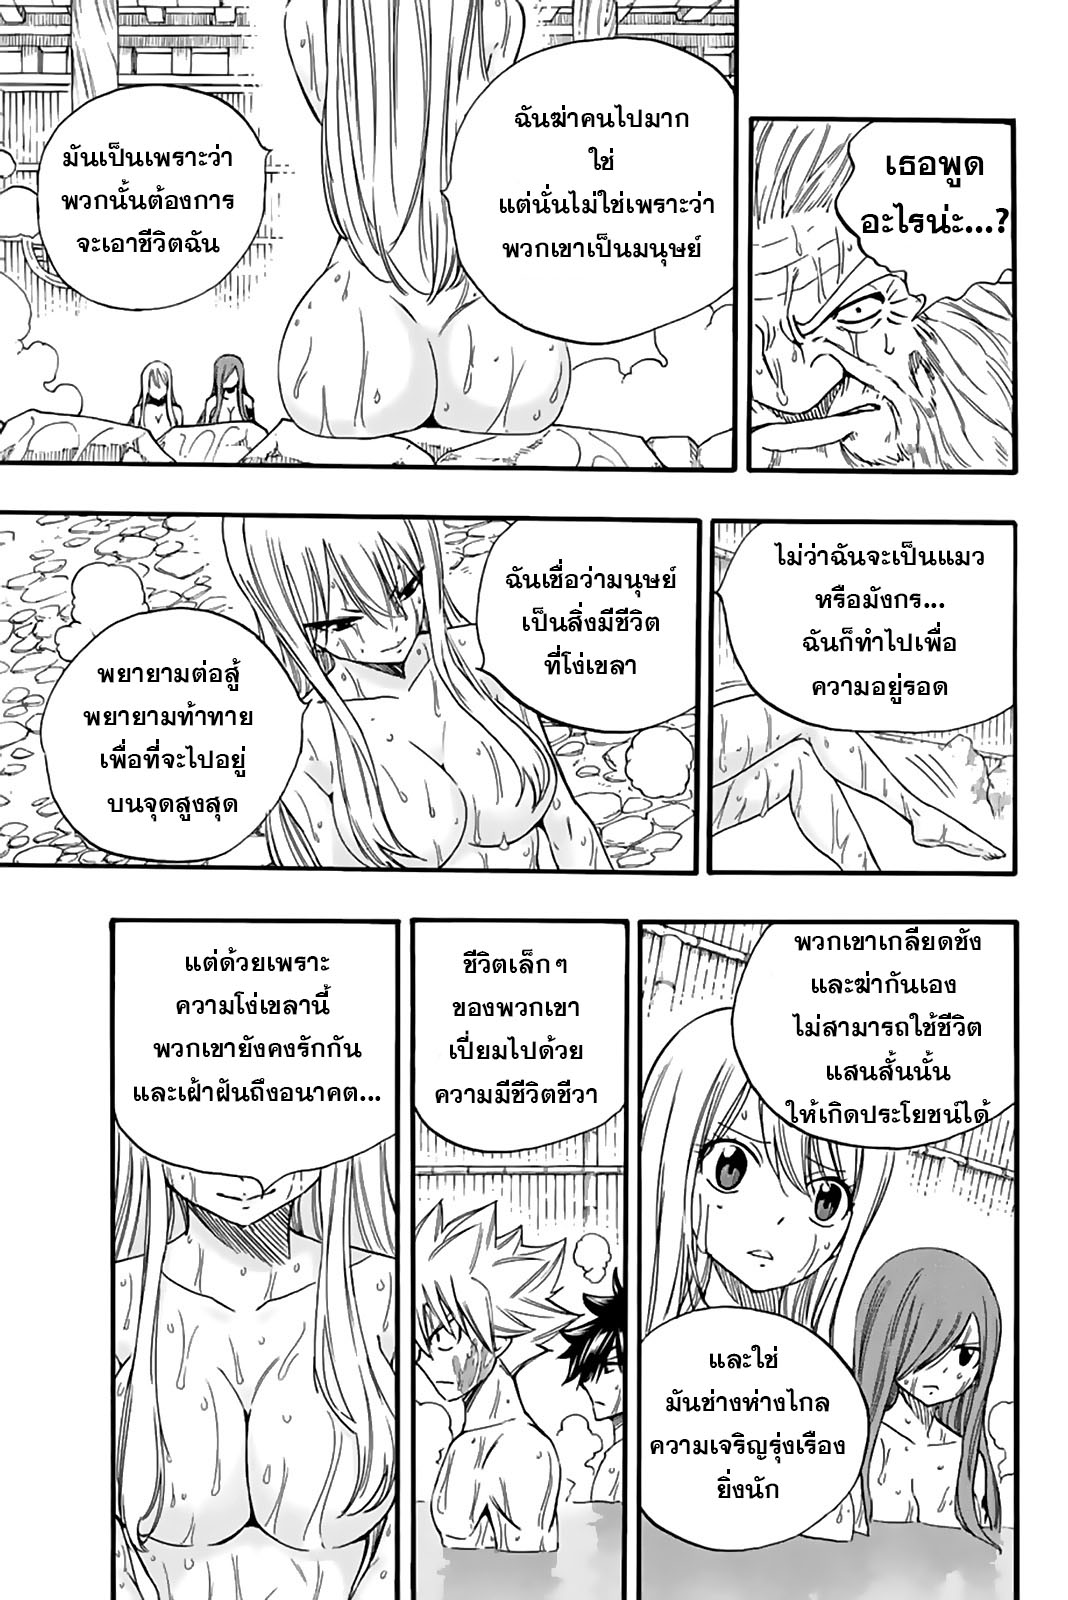 Fairy Tail 100 Years Quest 120 (15)